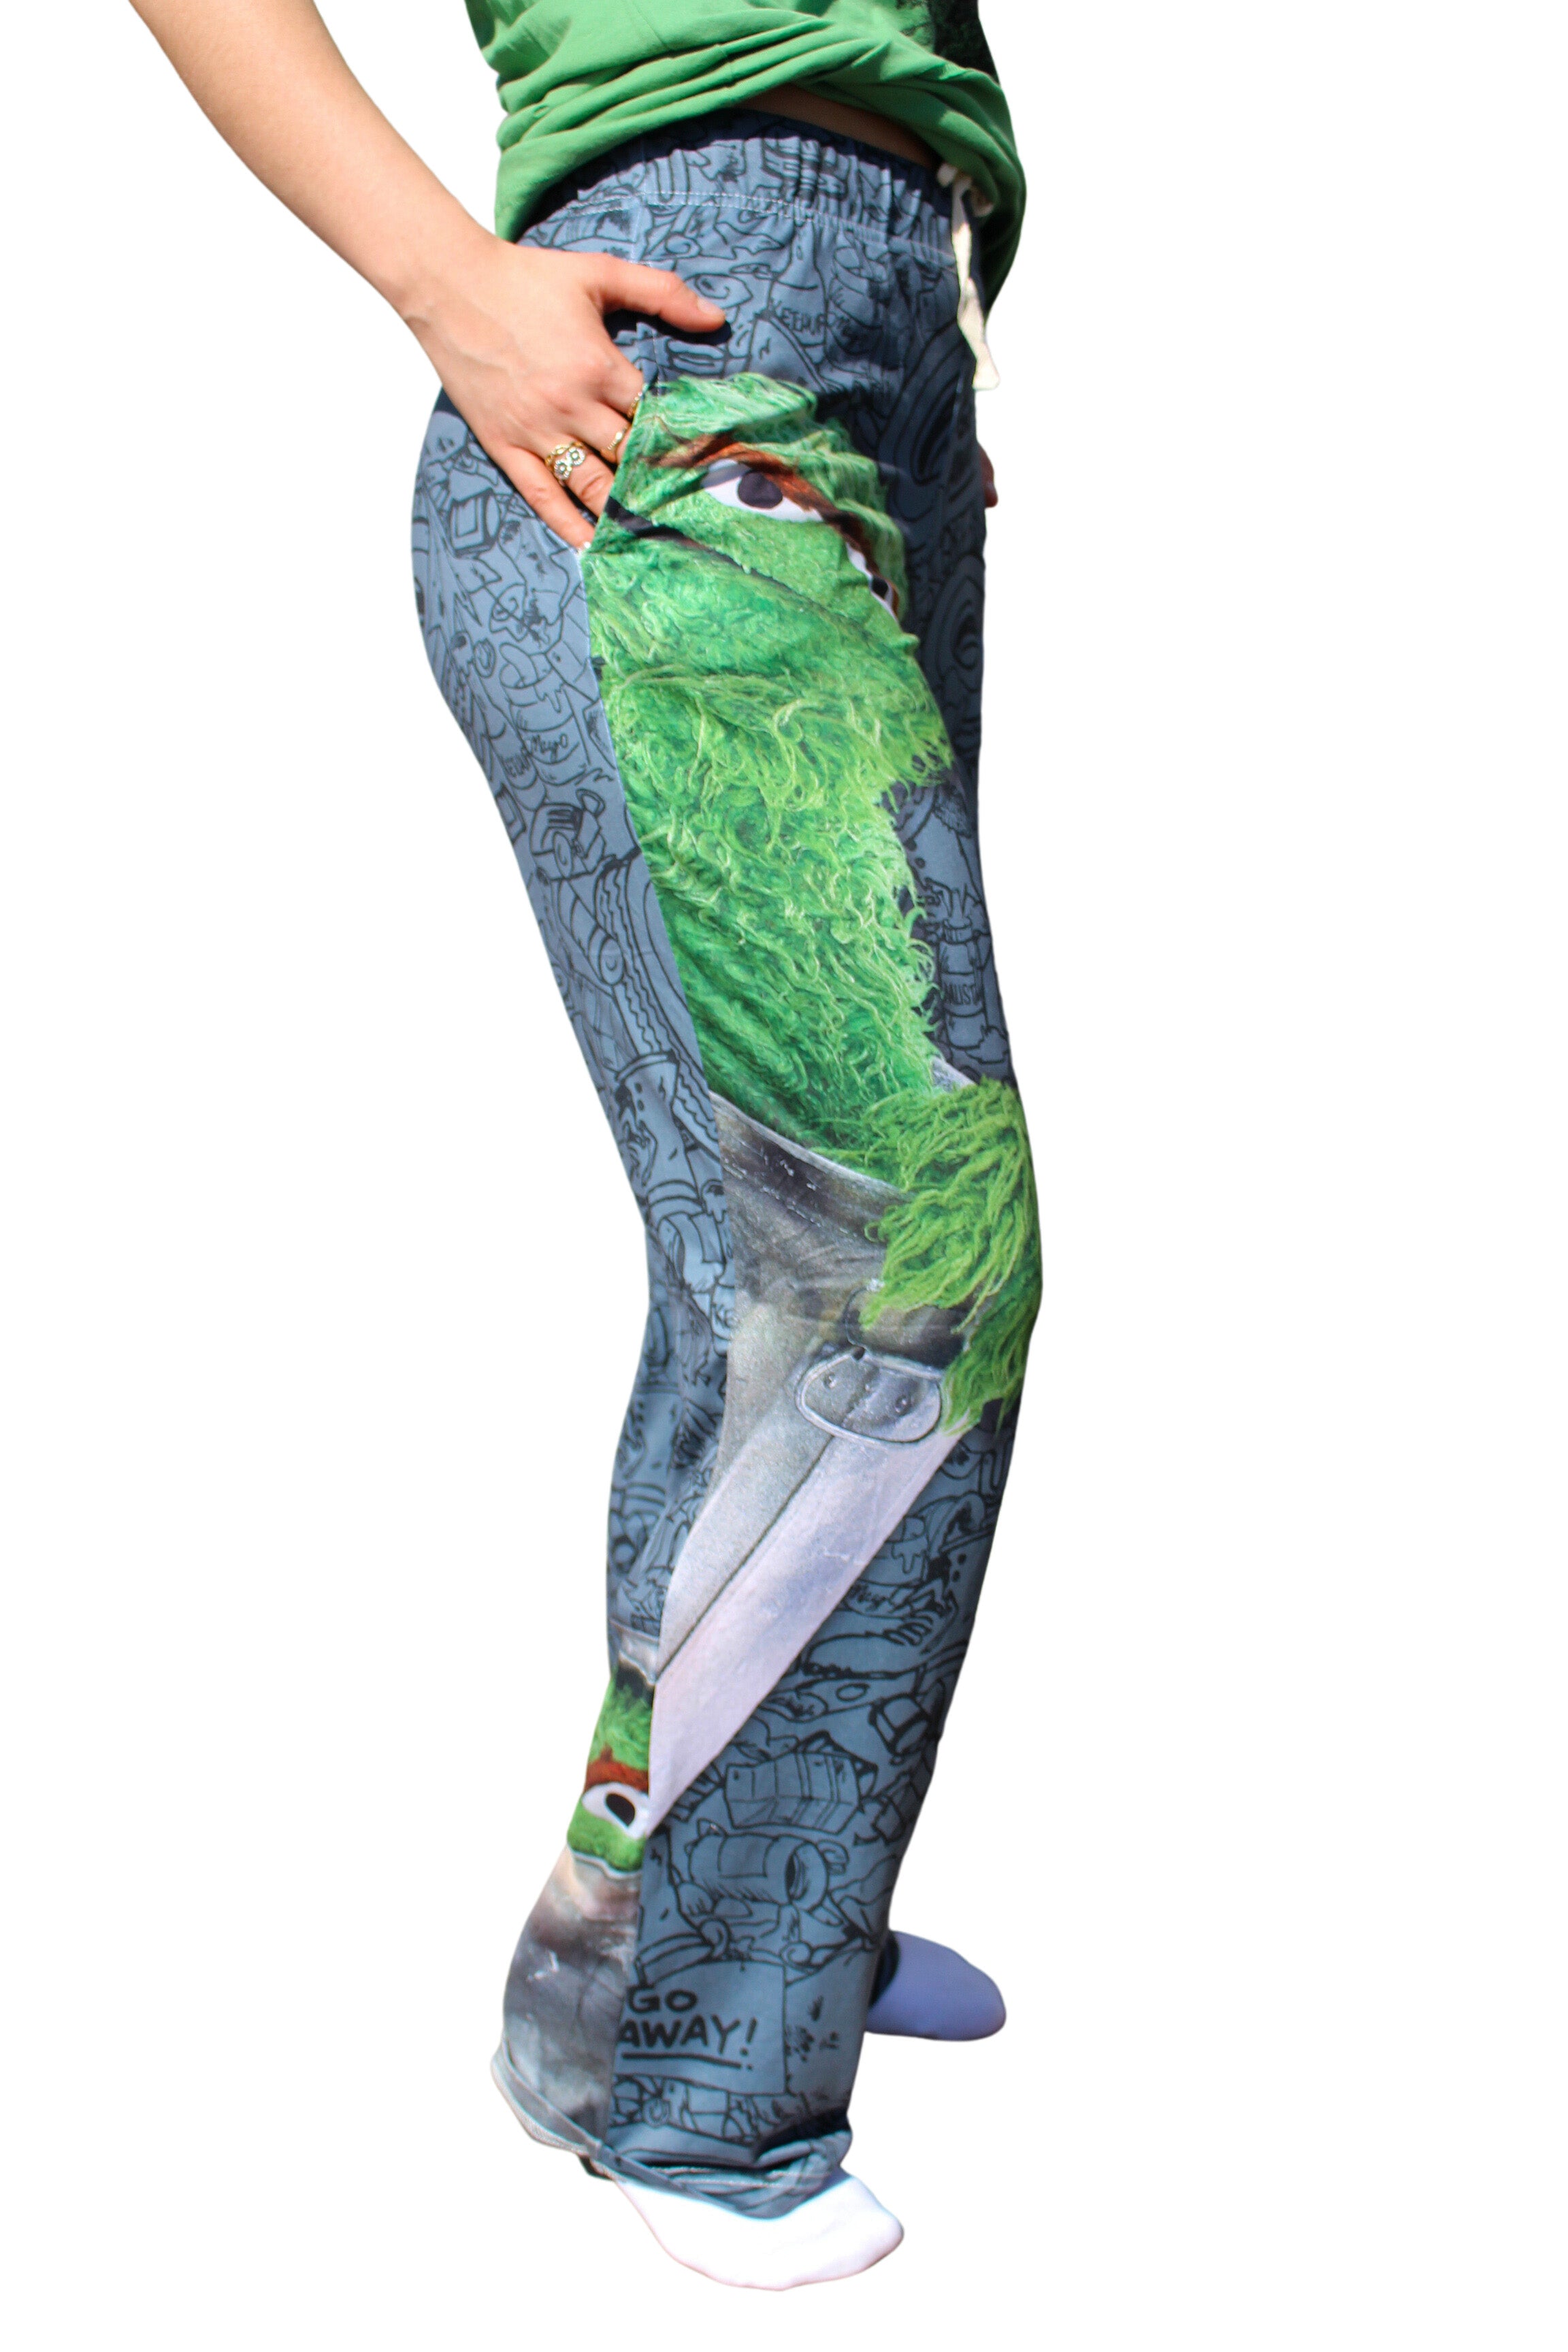 Oscar The Grouch pants side view